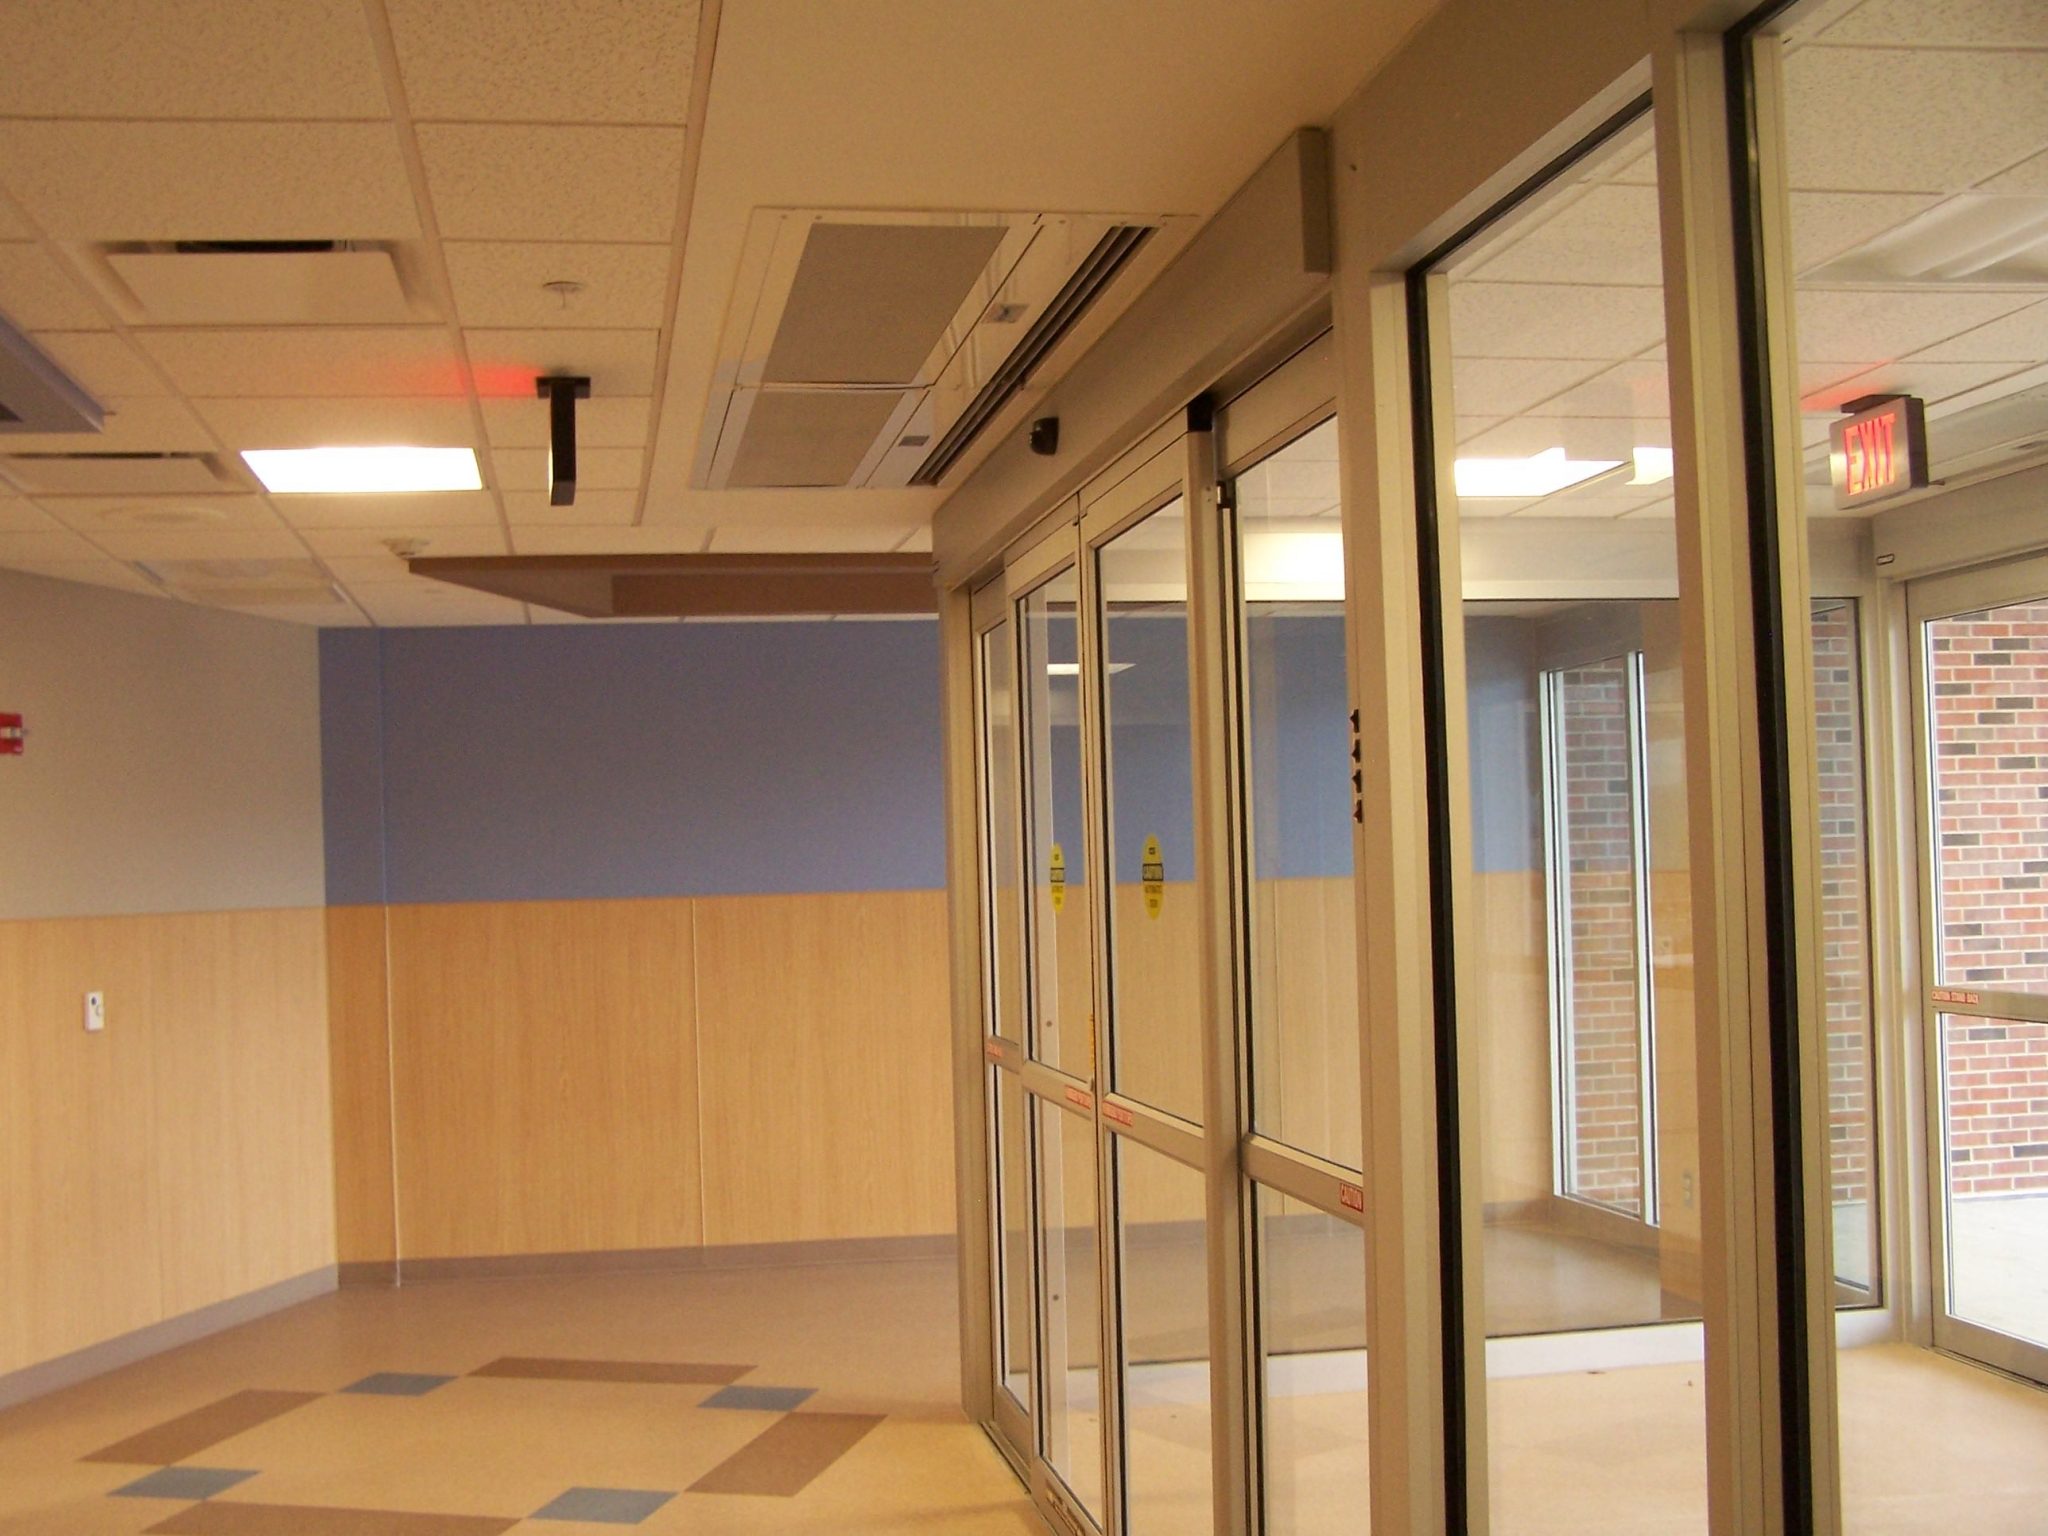 Berner In-Ceiling mounted air curtain over main entrance of hospital.